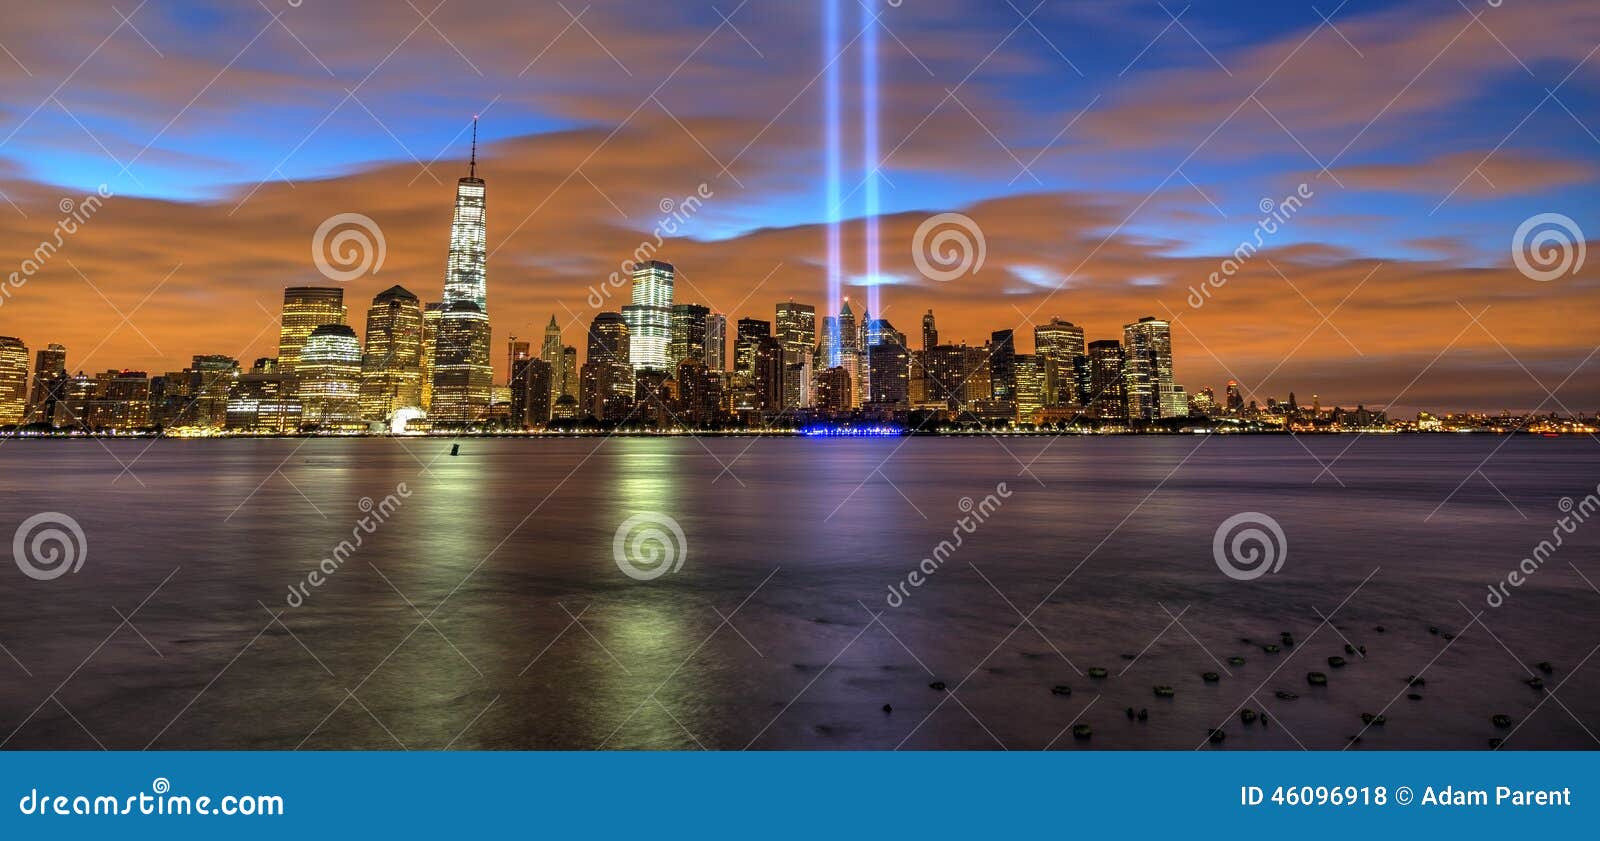 new york city skyline with 9/11 lights in the morning